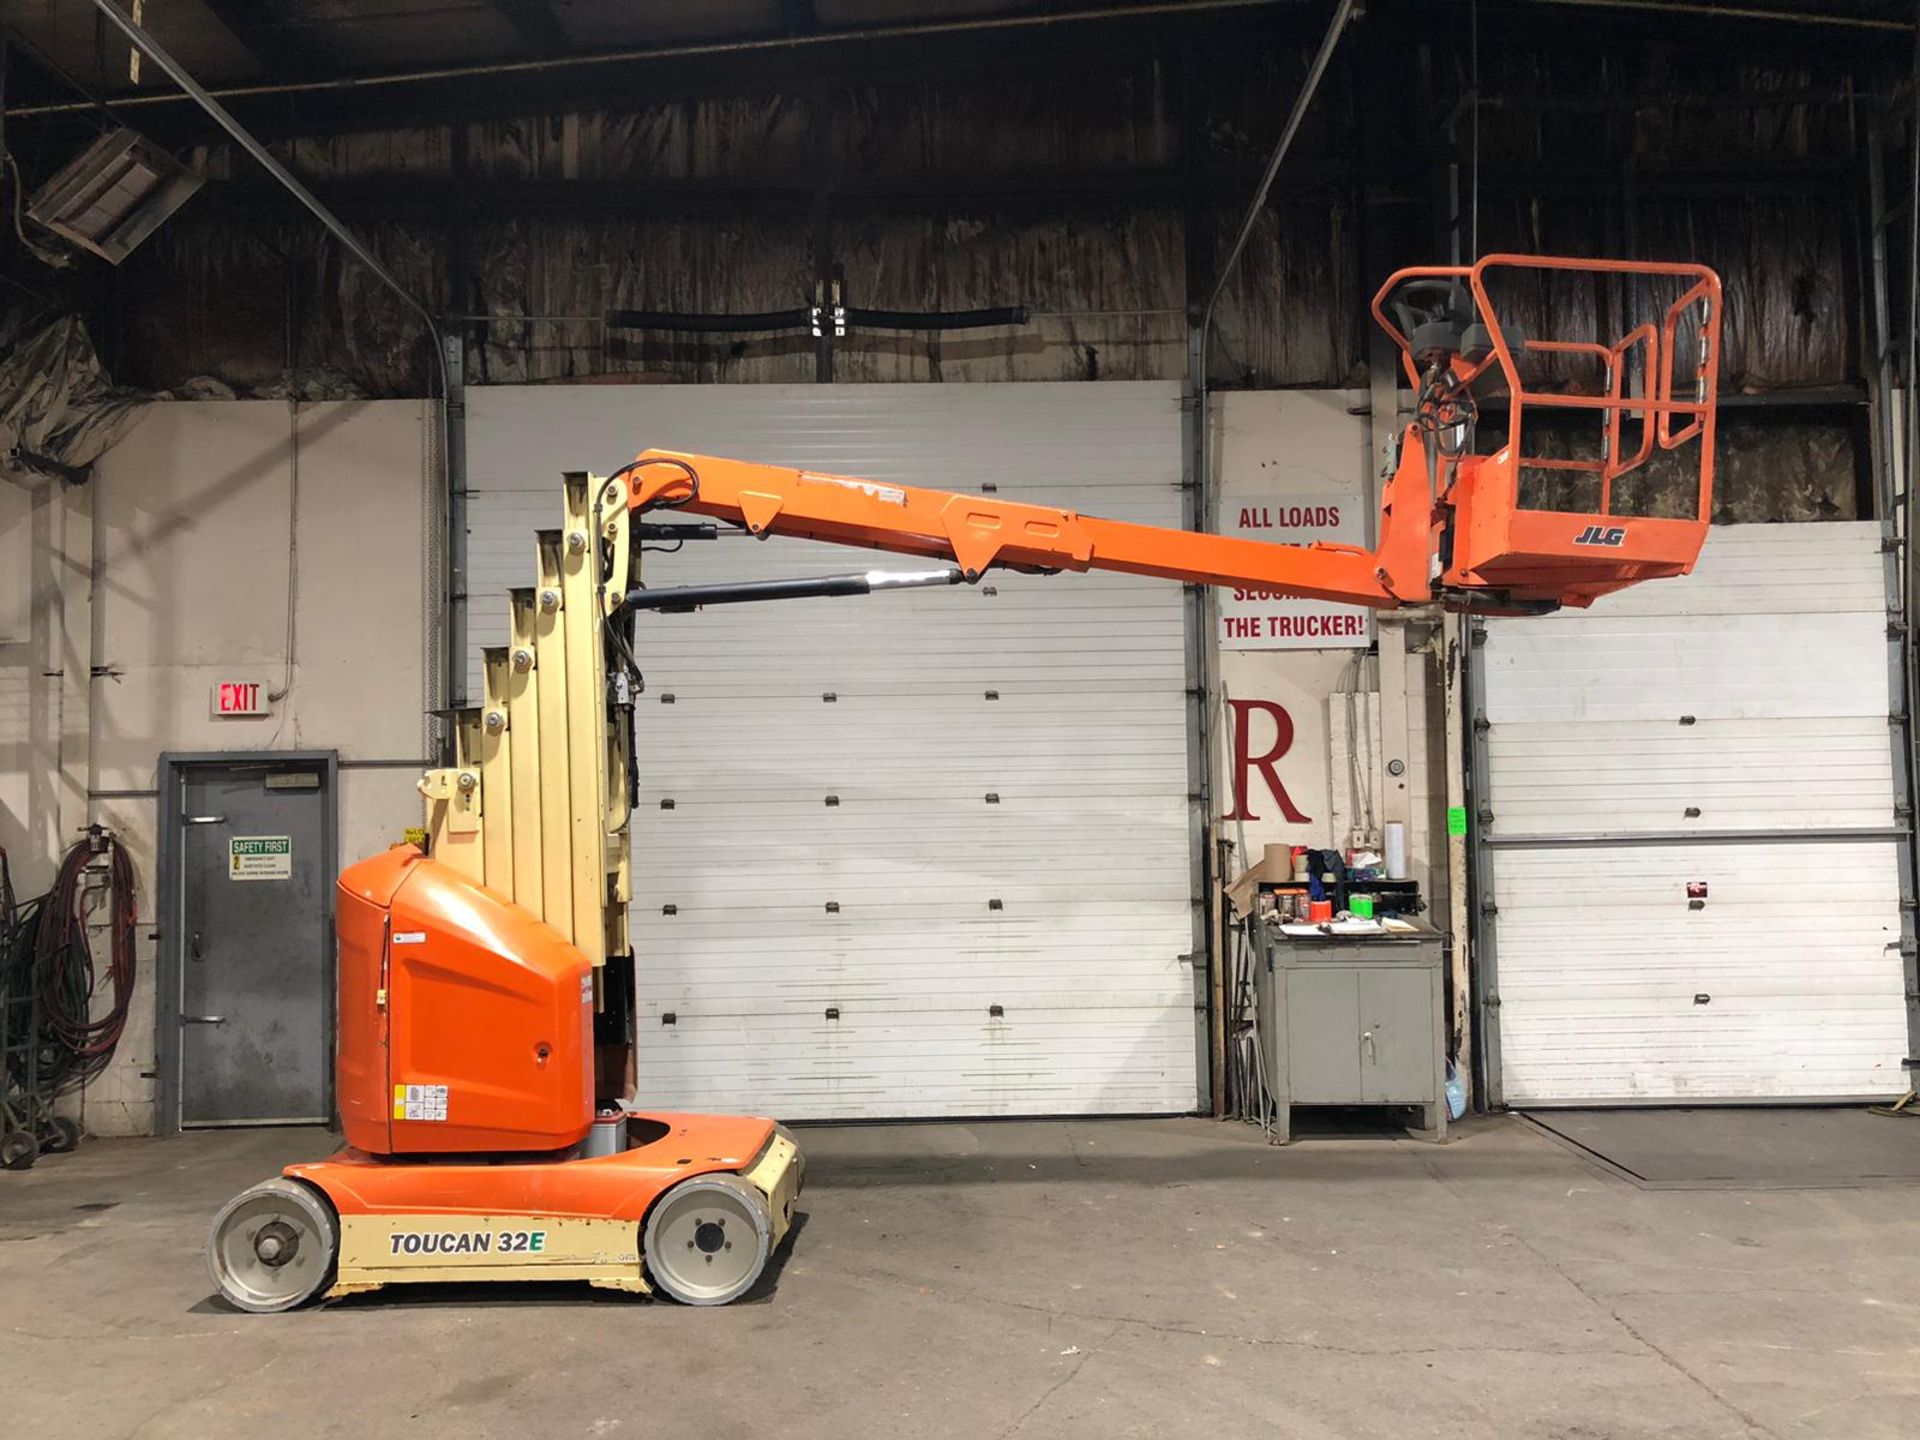 2014 JLG 32E Toucan Mast Boom Lift - Electric 48V with Low Hours with 32' Platform Height and 500lbs